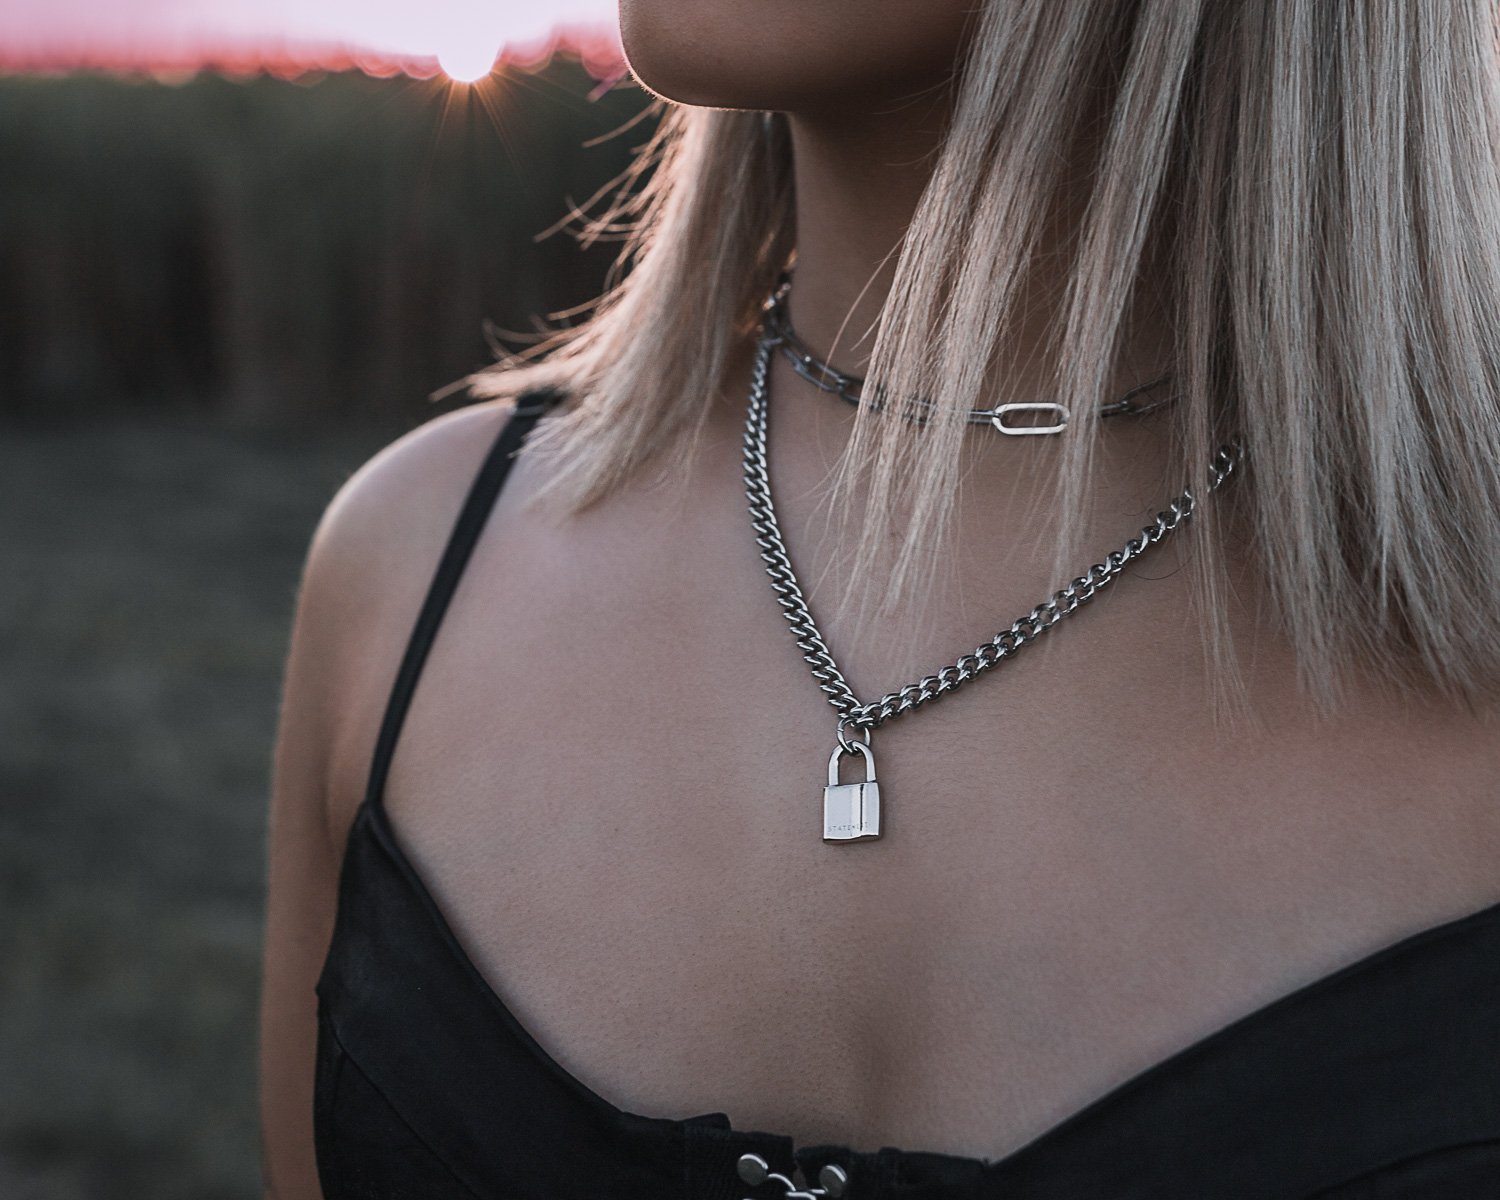 What is a Lock Necklace and Why Should You Add One to Your Wardrobe?